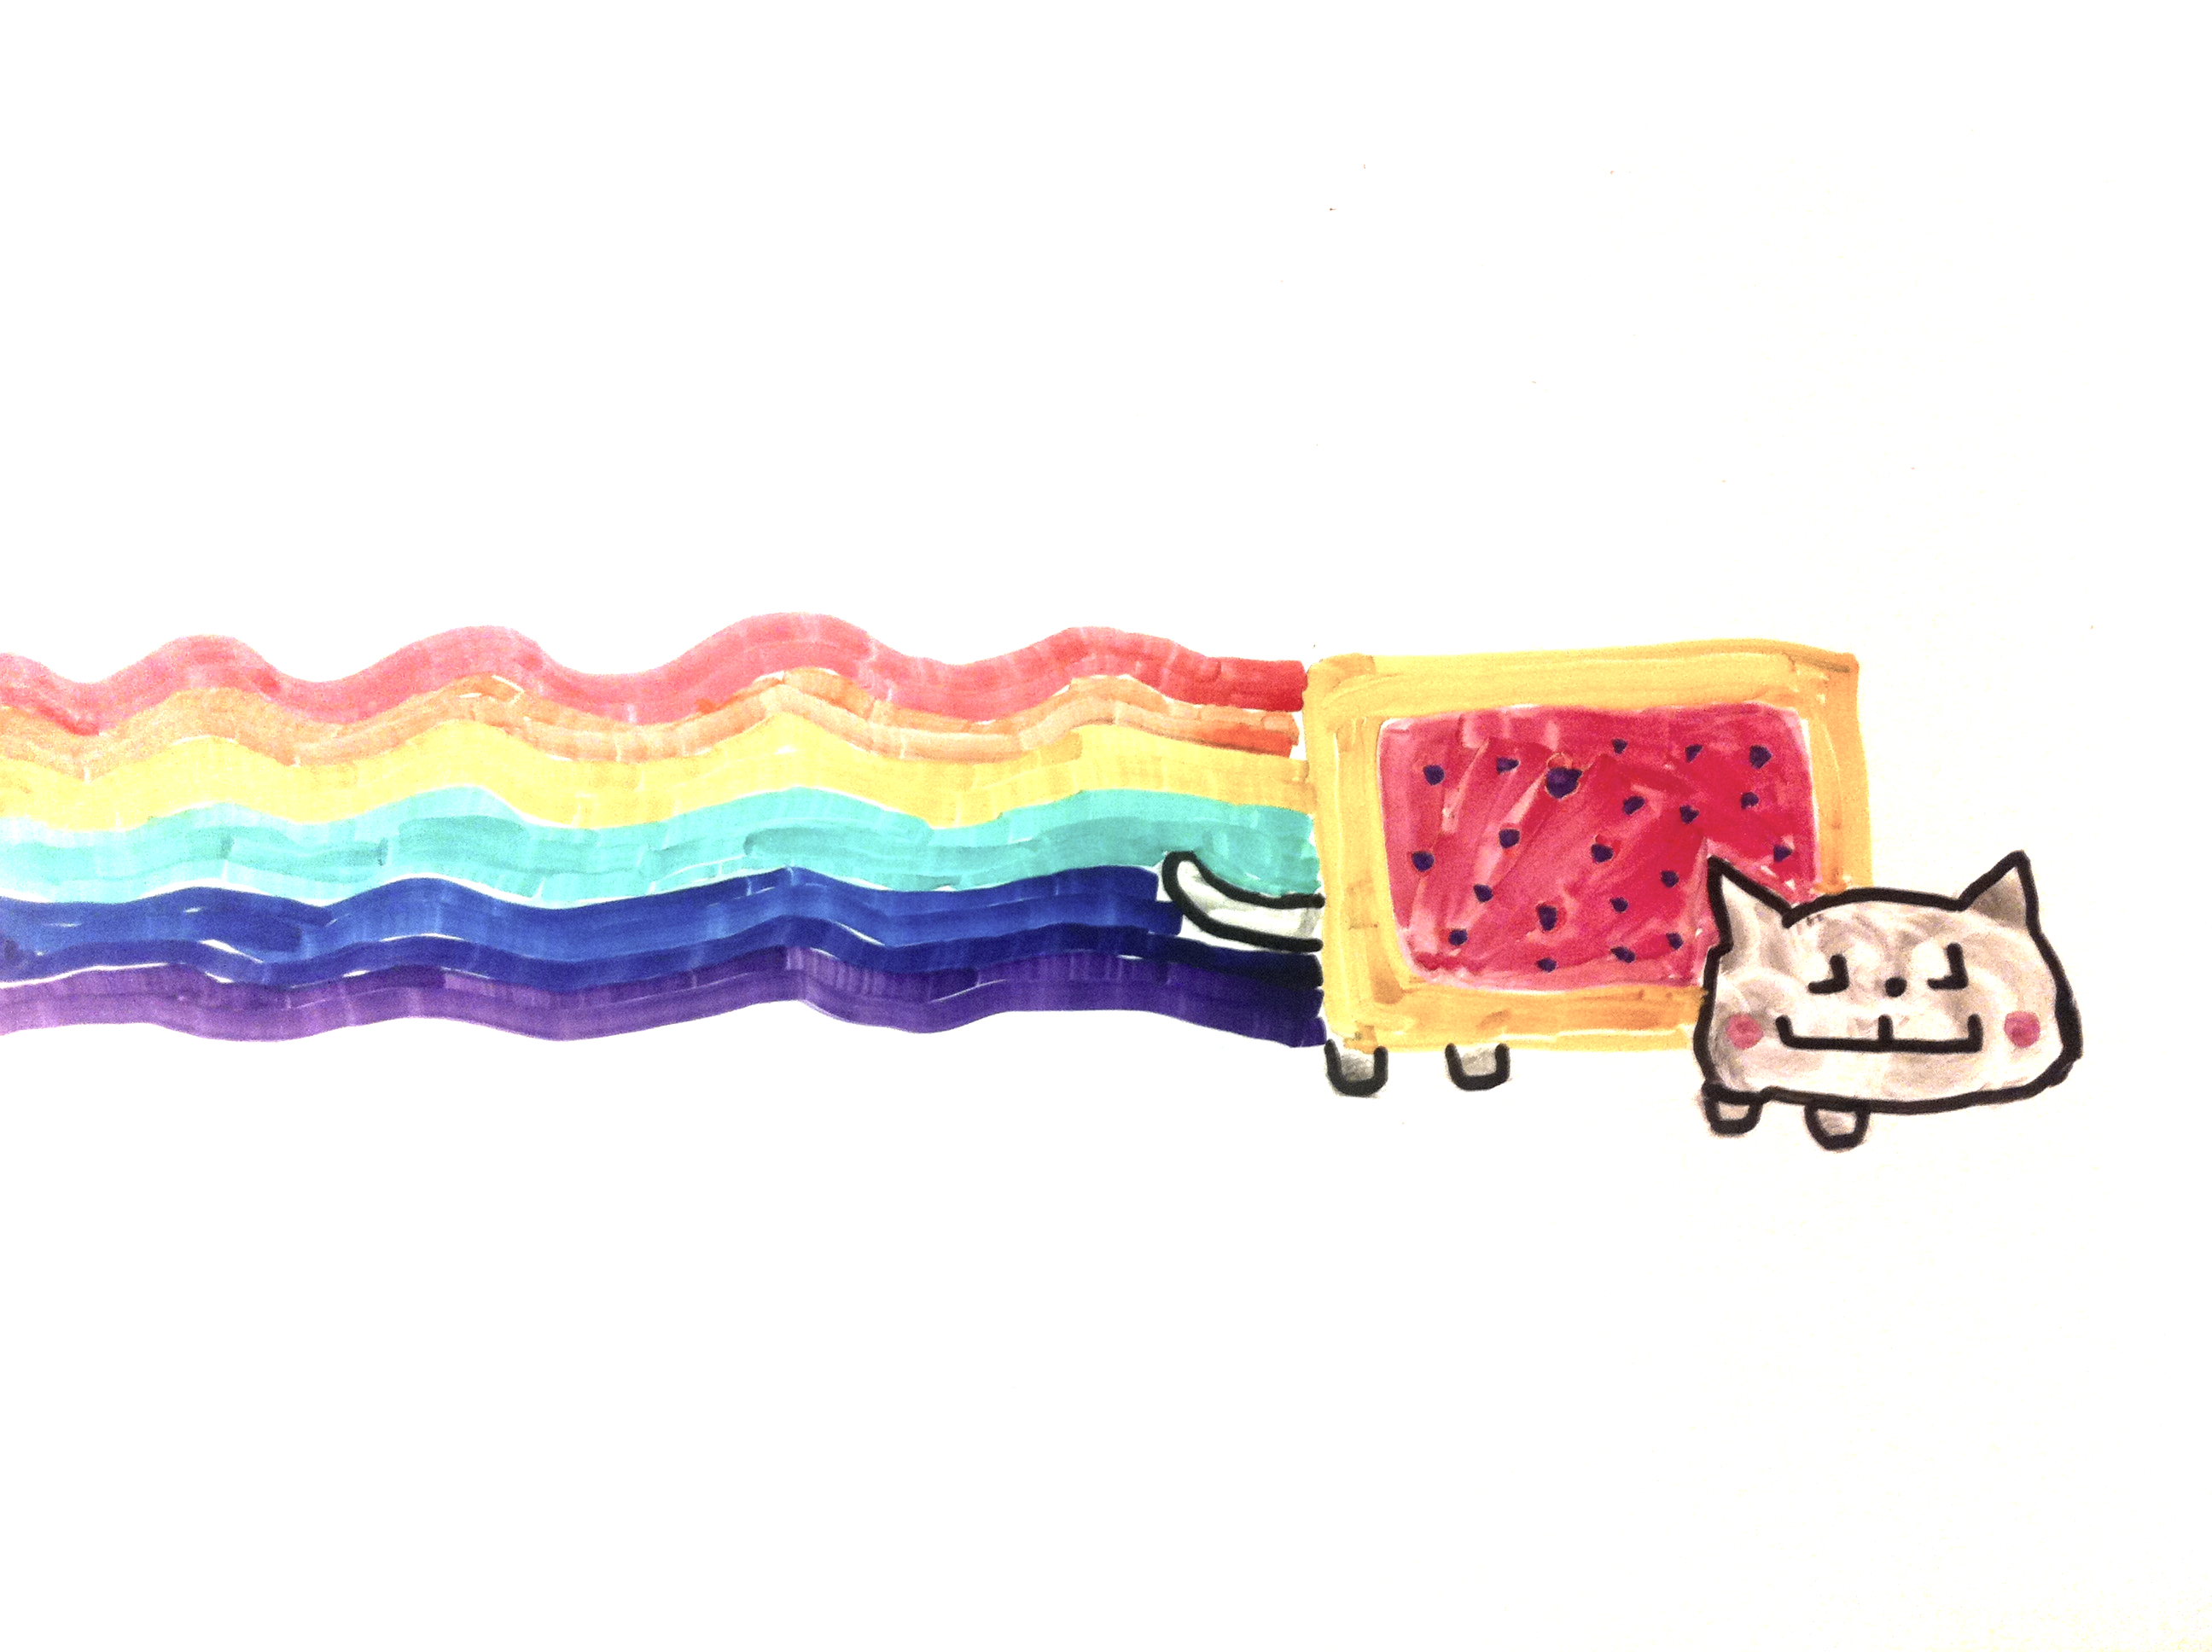 Nyan cat in whiteboard drawing style